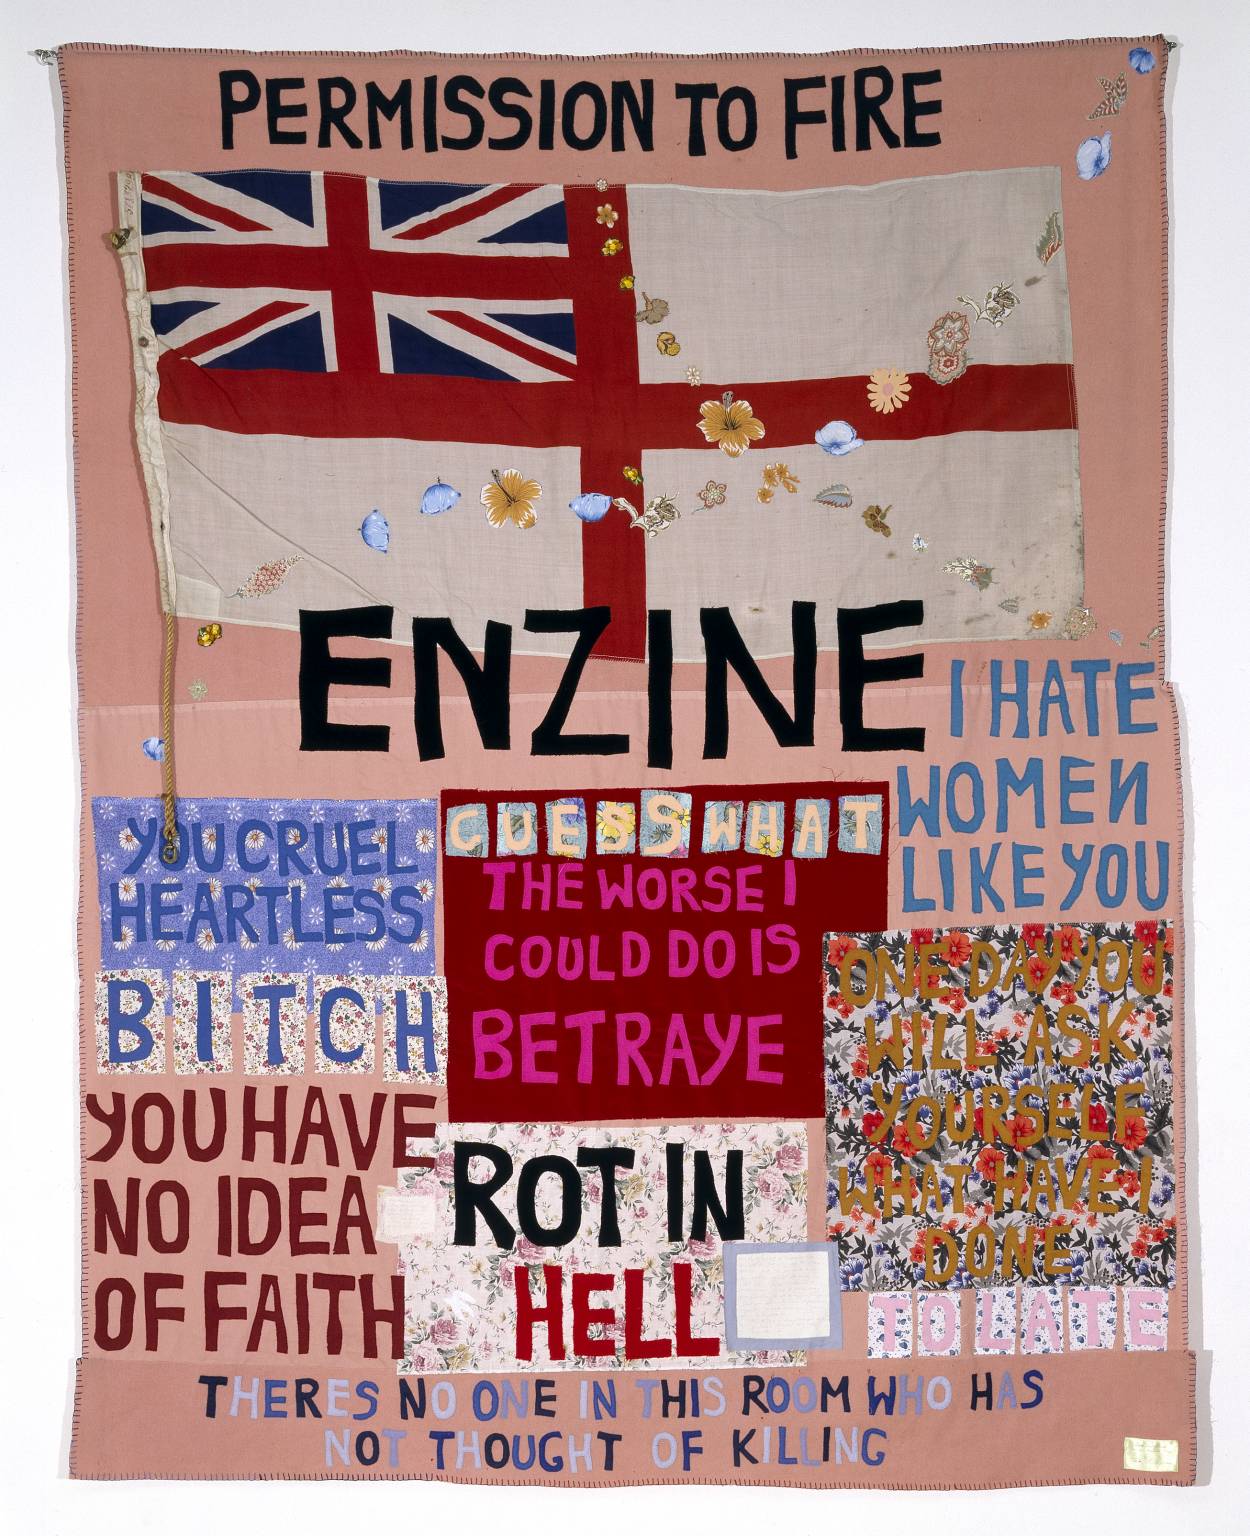 Hate and Power Can be a Terrible Thing 2004 by Tracey Emin born 1963